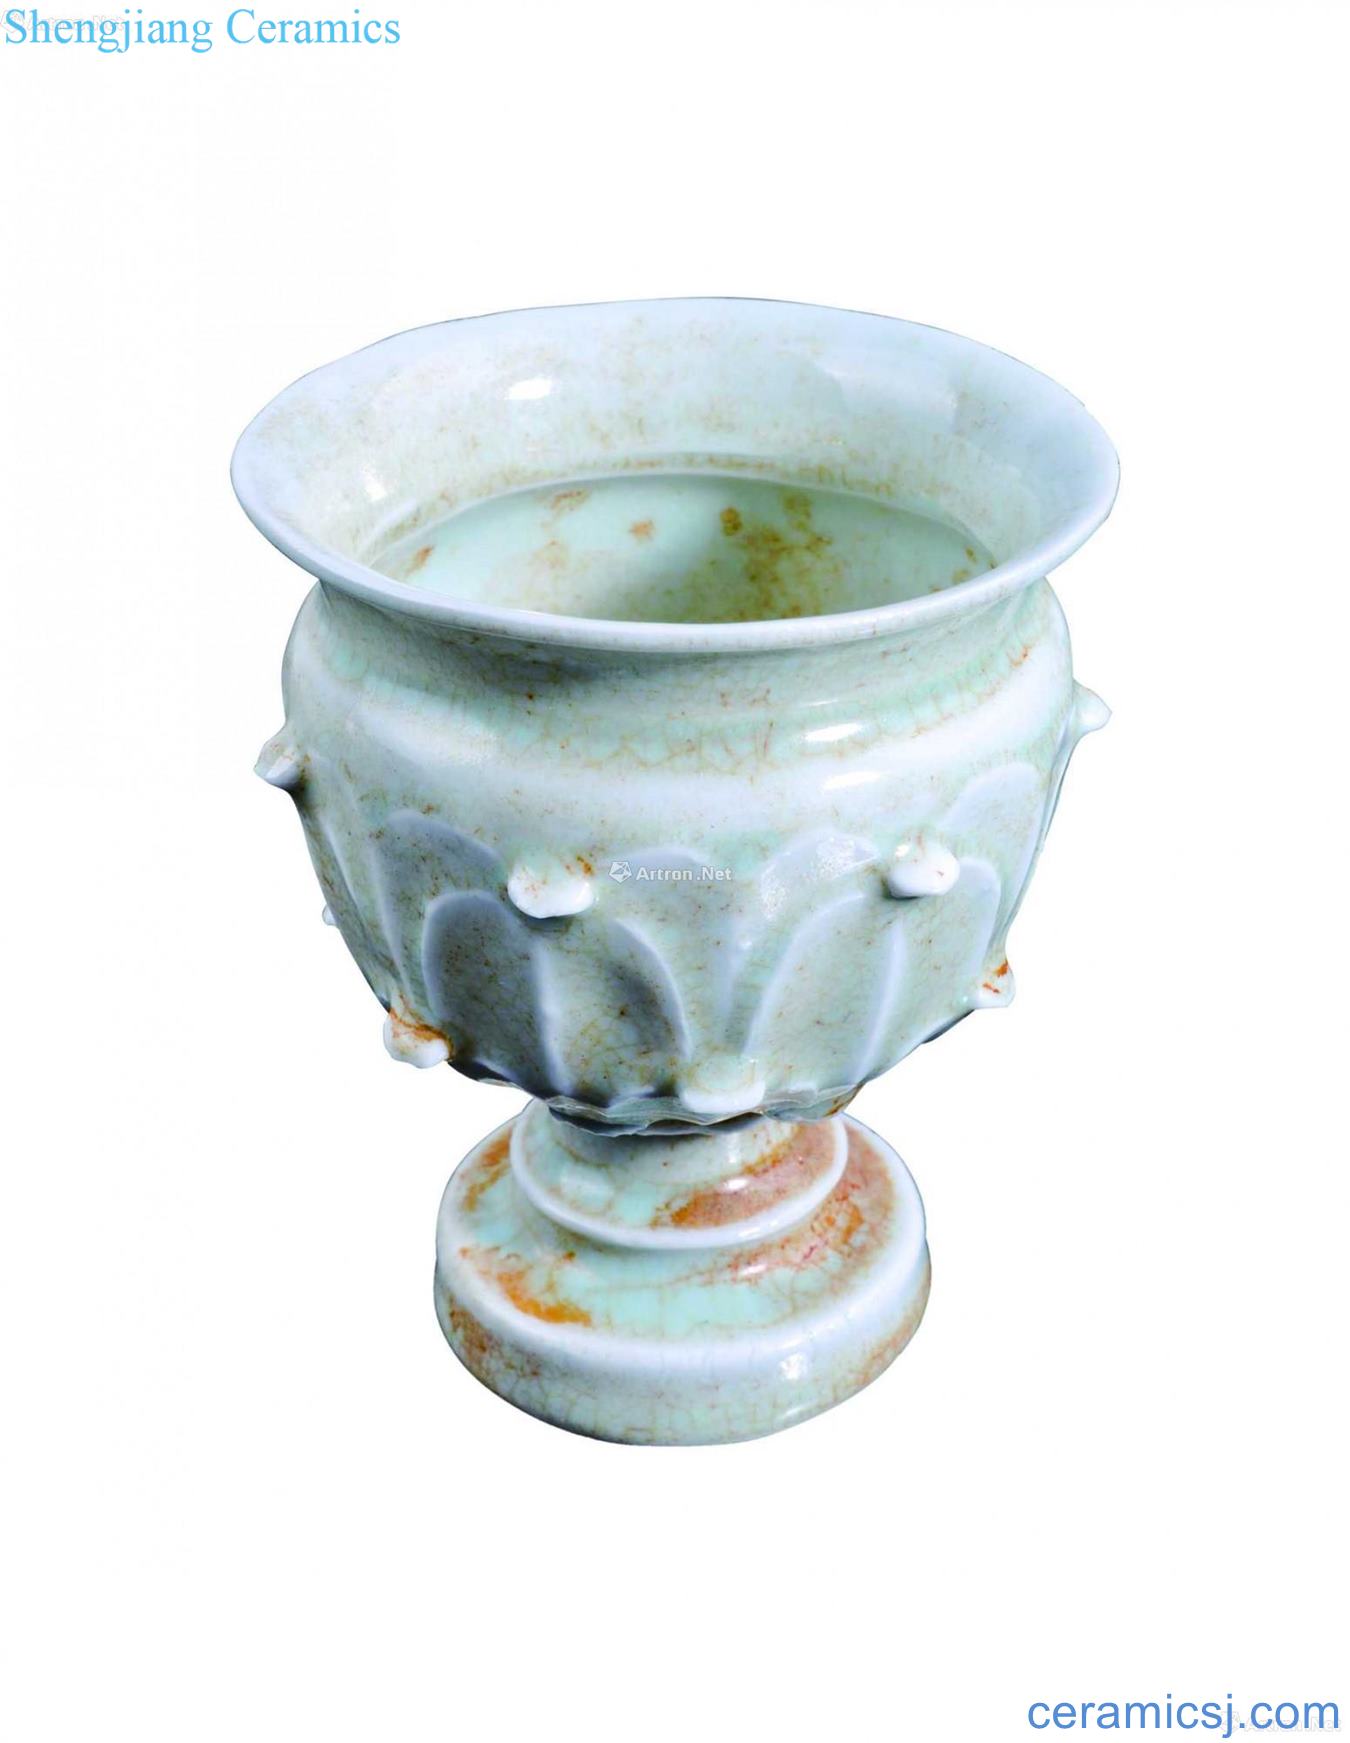 Lotus-shaped grain footed cup